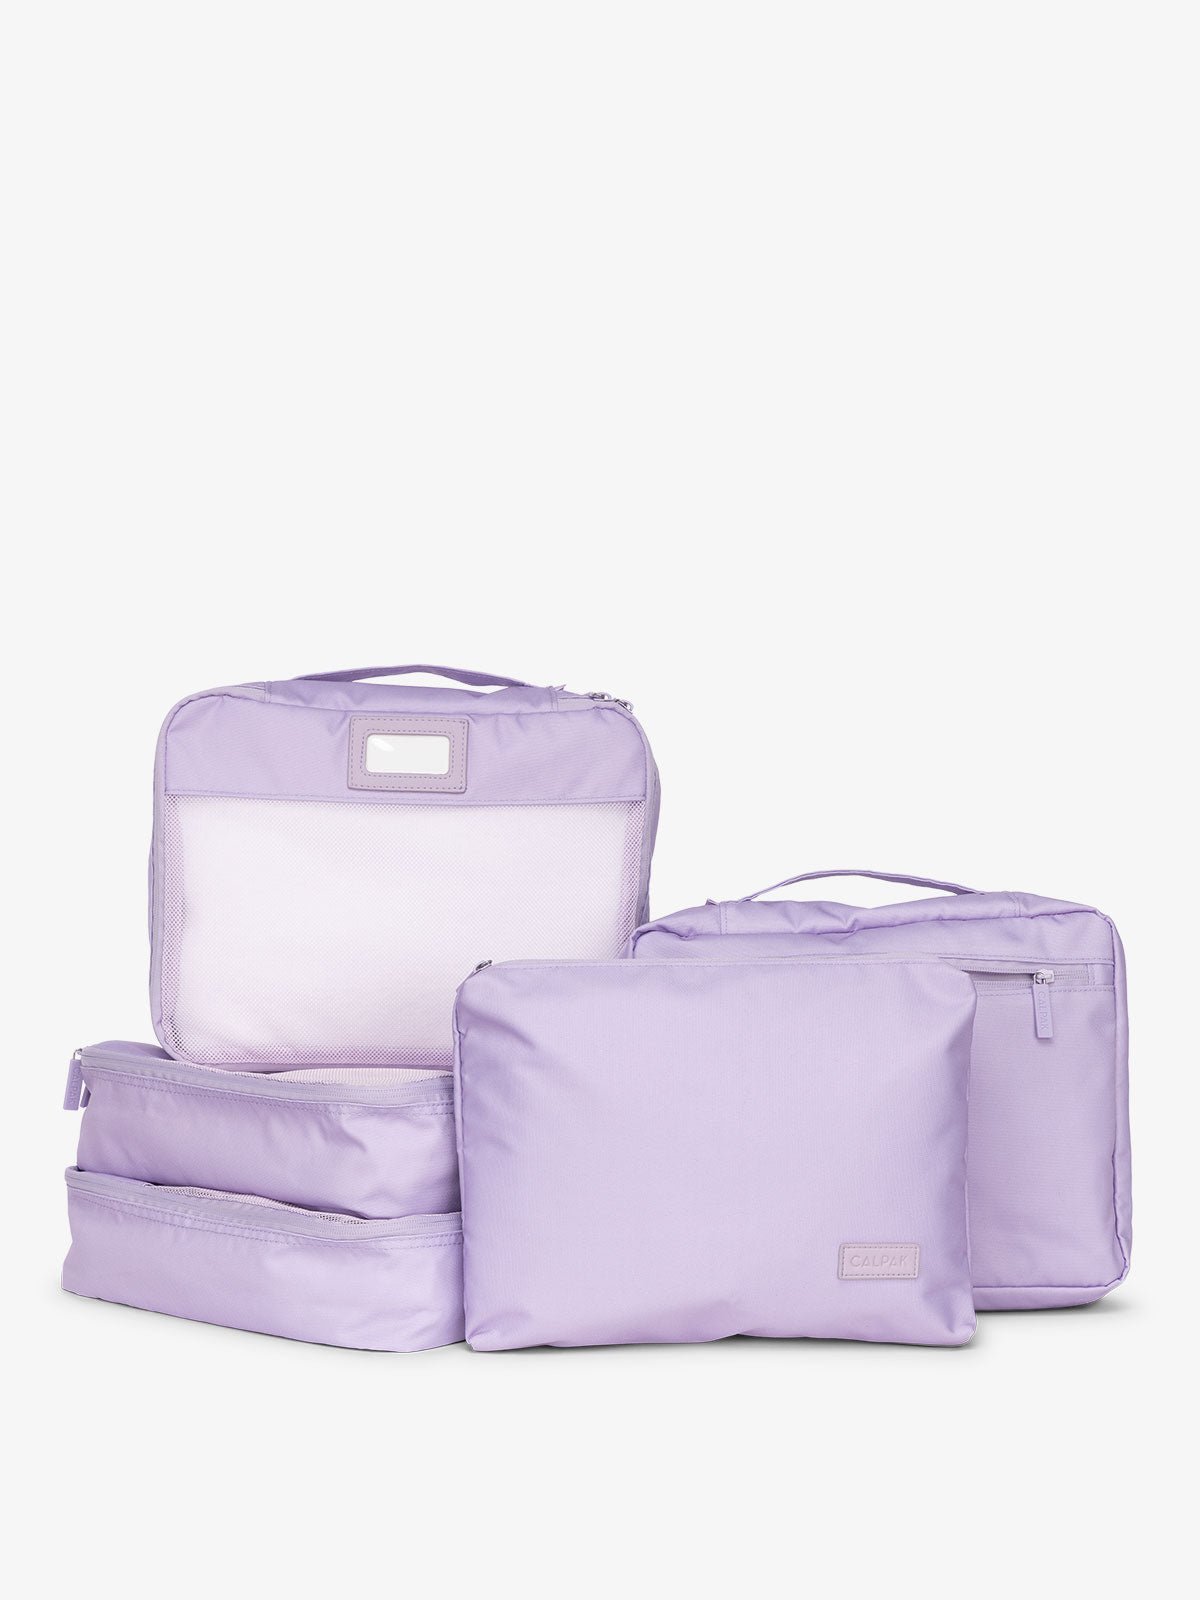 CALPAK 5 piece set packing cubes for travel with labels and top handles in orchid